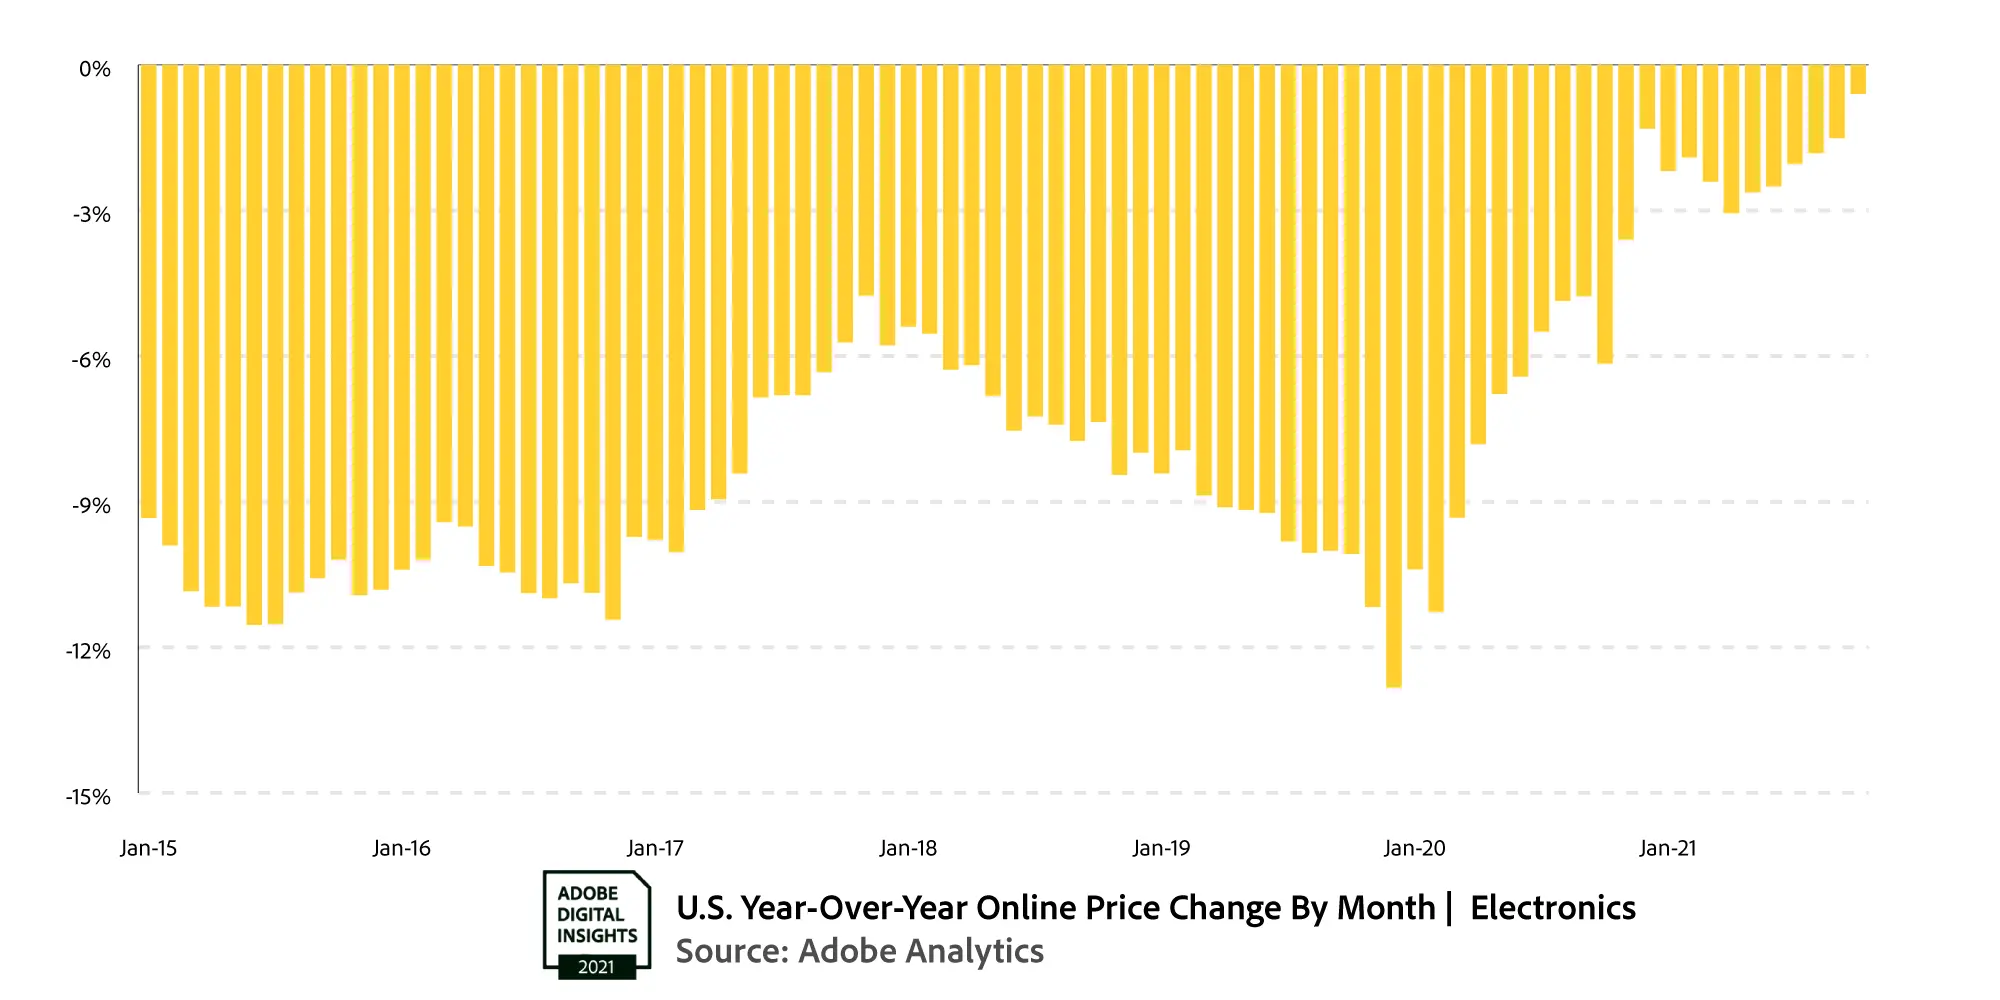 Adobe Digital Economy Index: YoY change in online prices for electronics. 